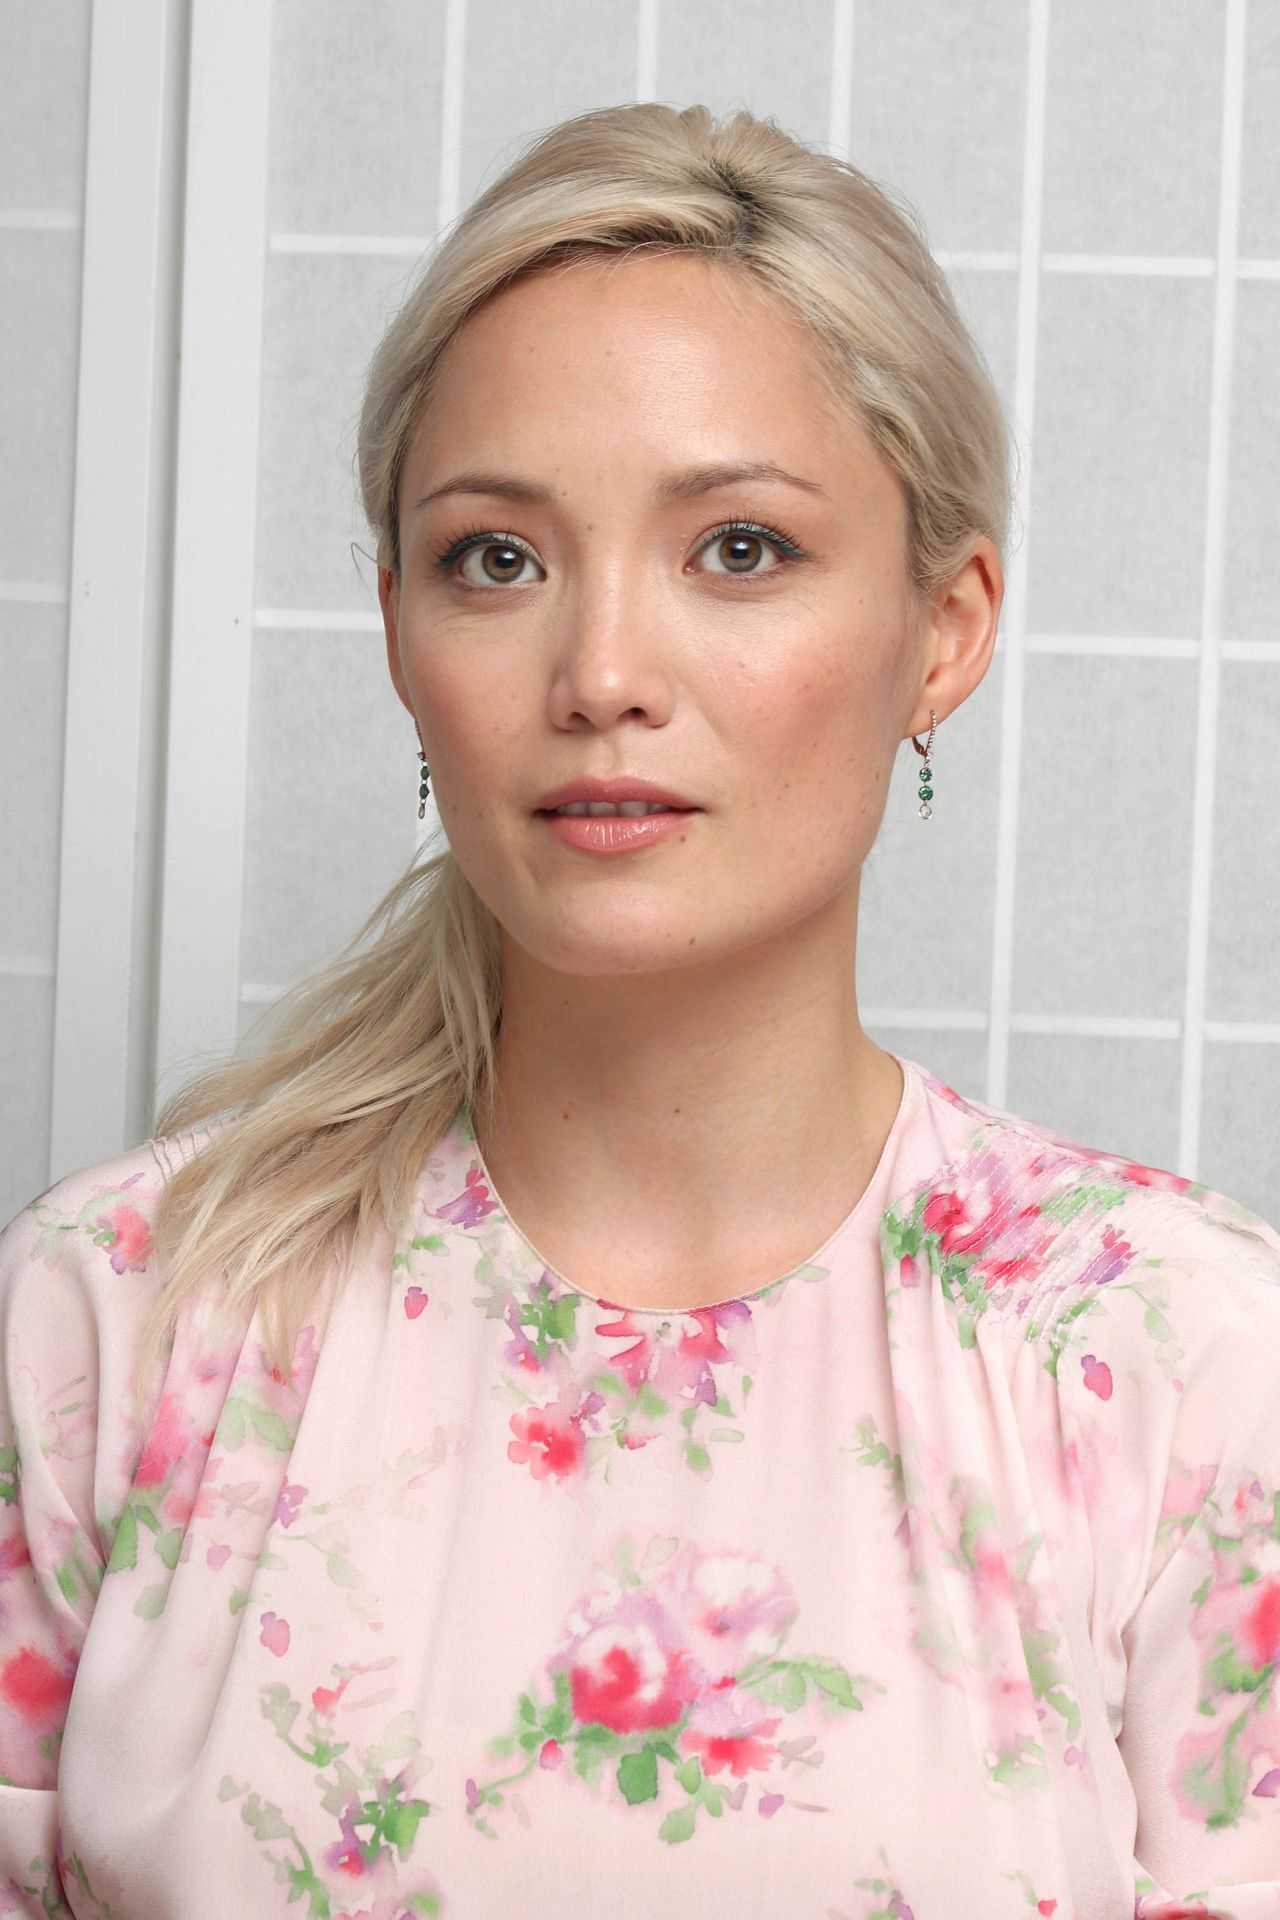 70+ Hot Pictures Of Pom Klementieff Who Plays Mantis In Marvel Cinematic Universe 243